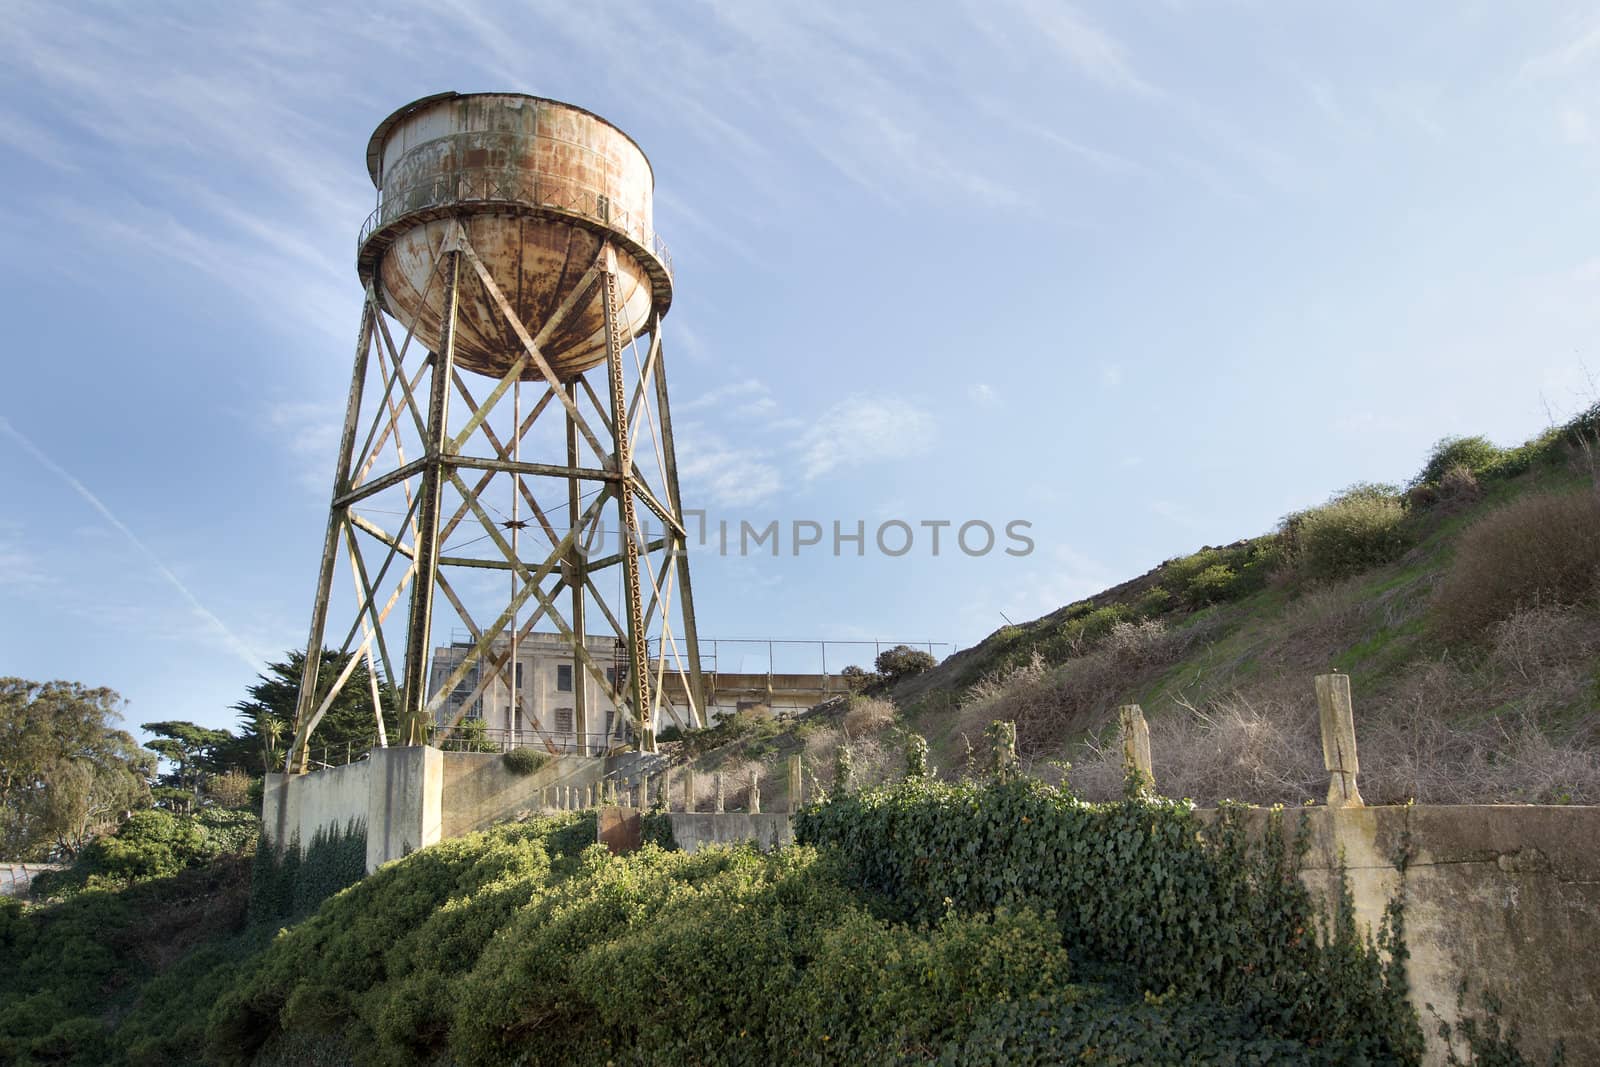 Water Tower at Alcatraz Island Federal Penitentiary